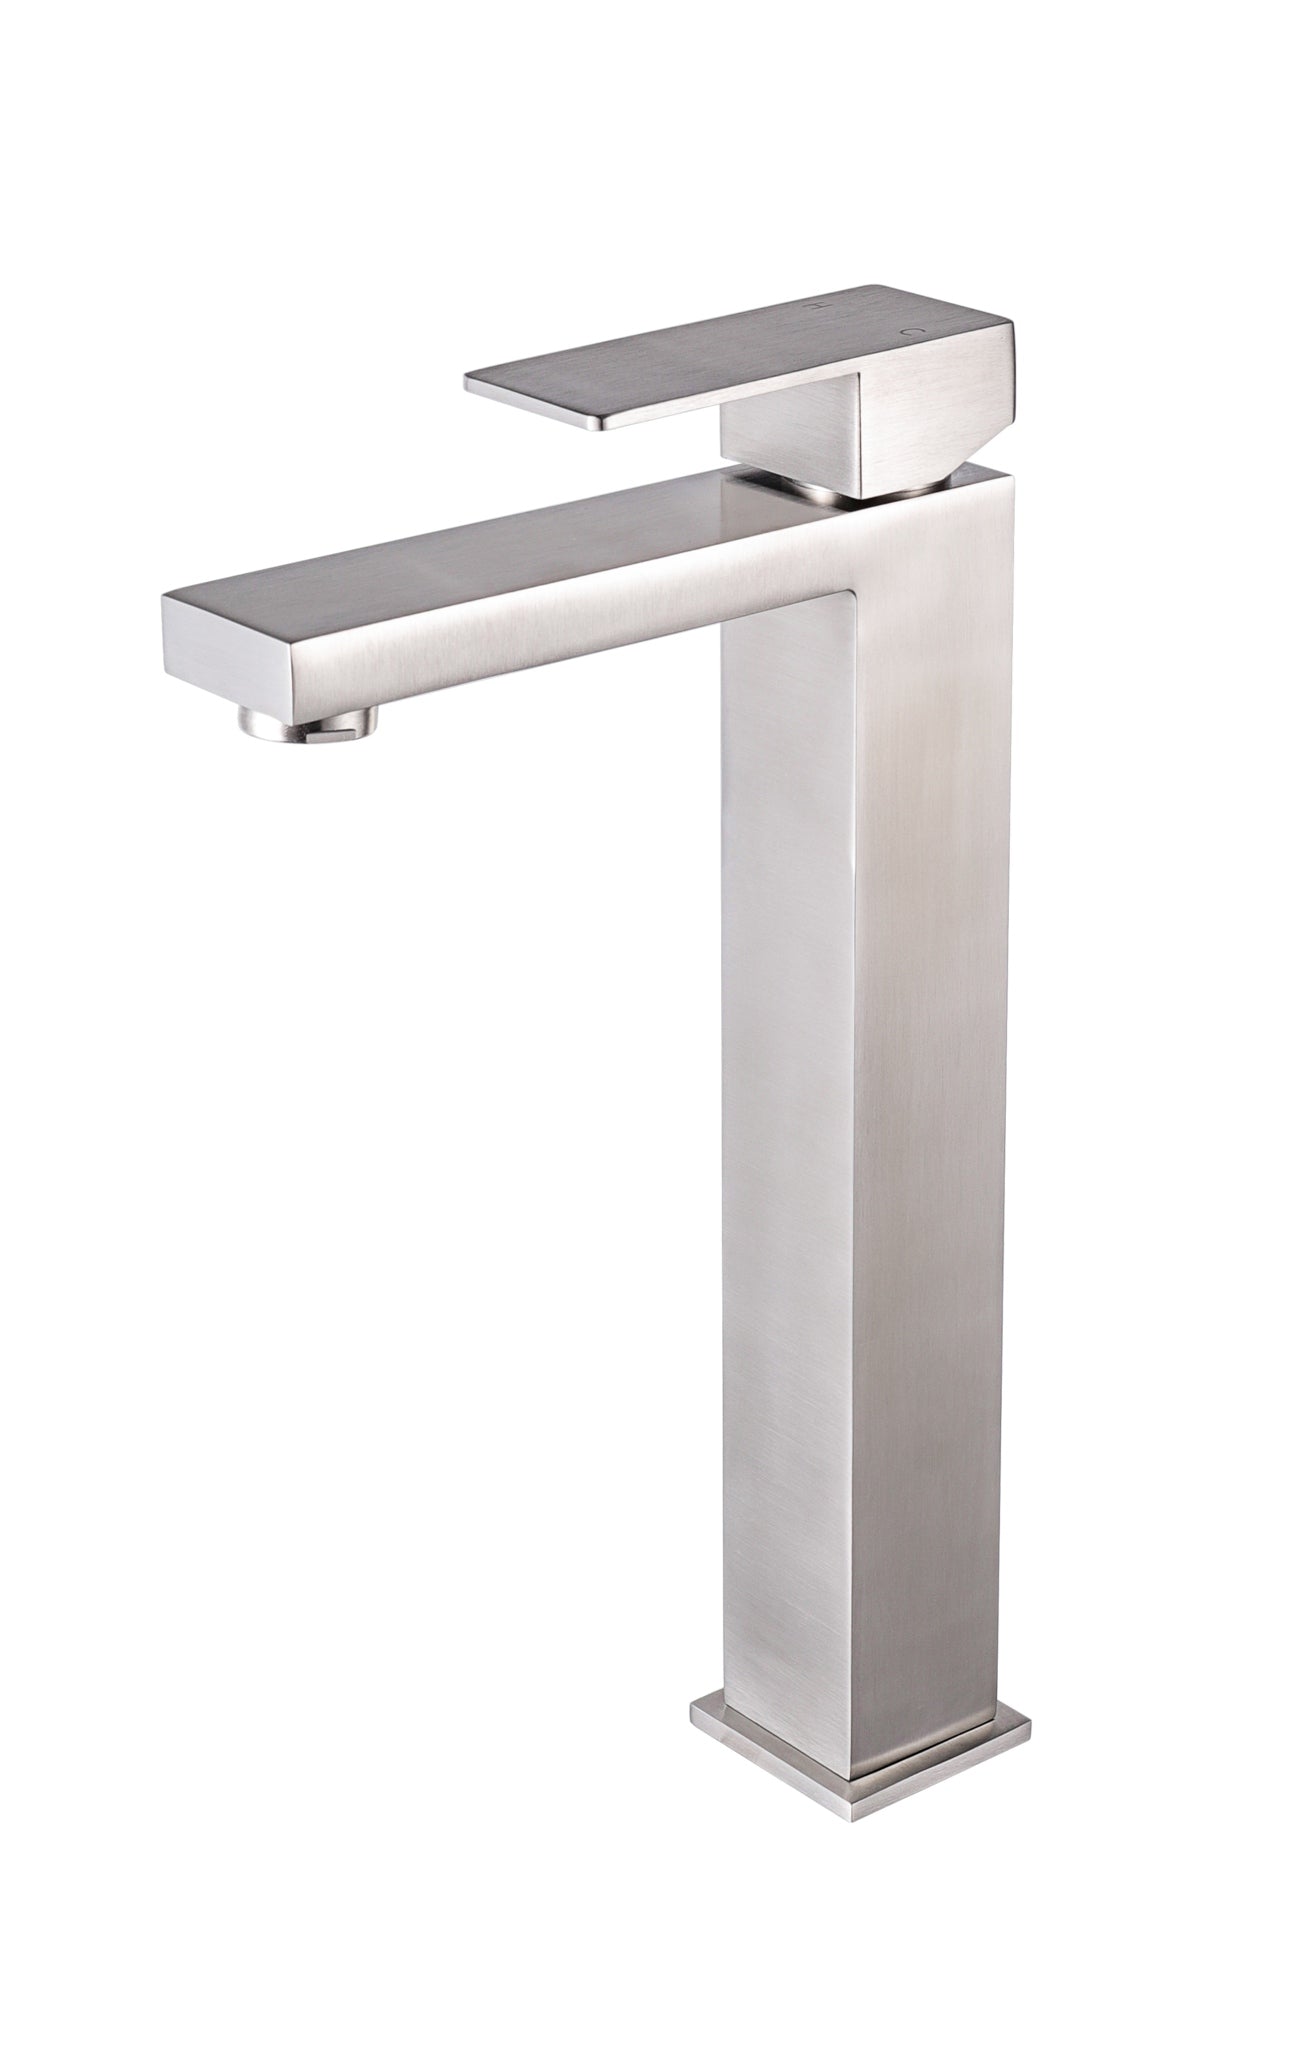 Aquamoon Milan Collection Single Lever Bathroom Vessel Faucet Brushed Nickel Finish